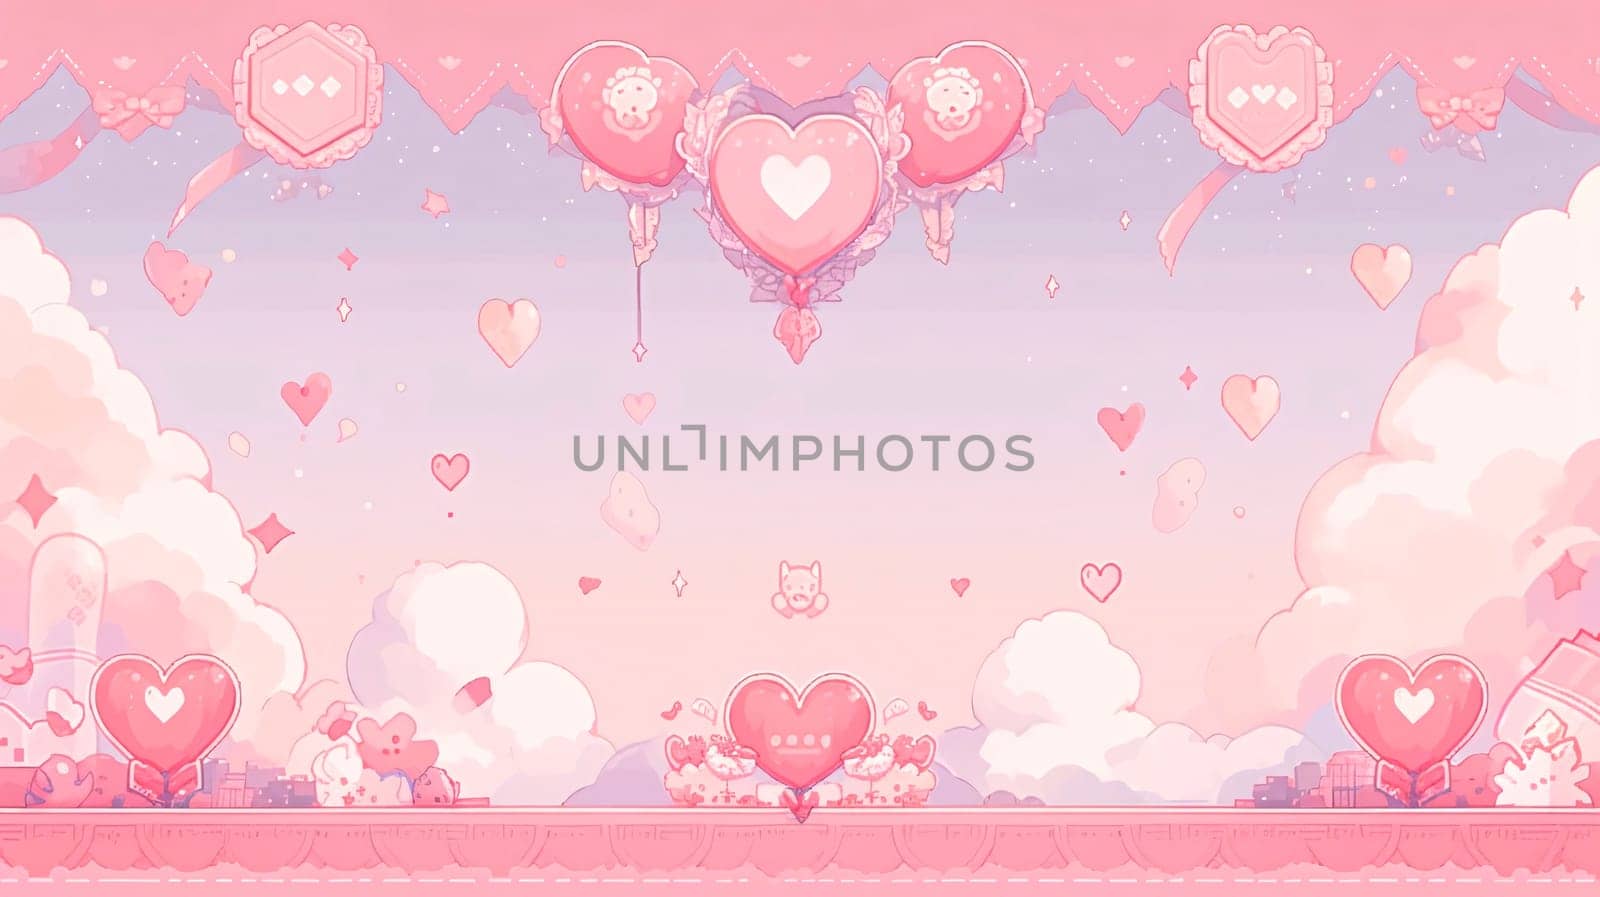 Banner: Cute valentine's day background with hearts and balloons.